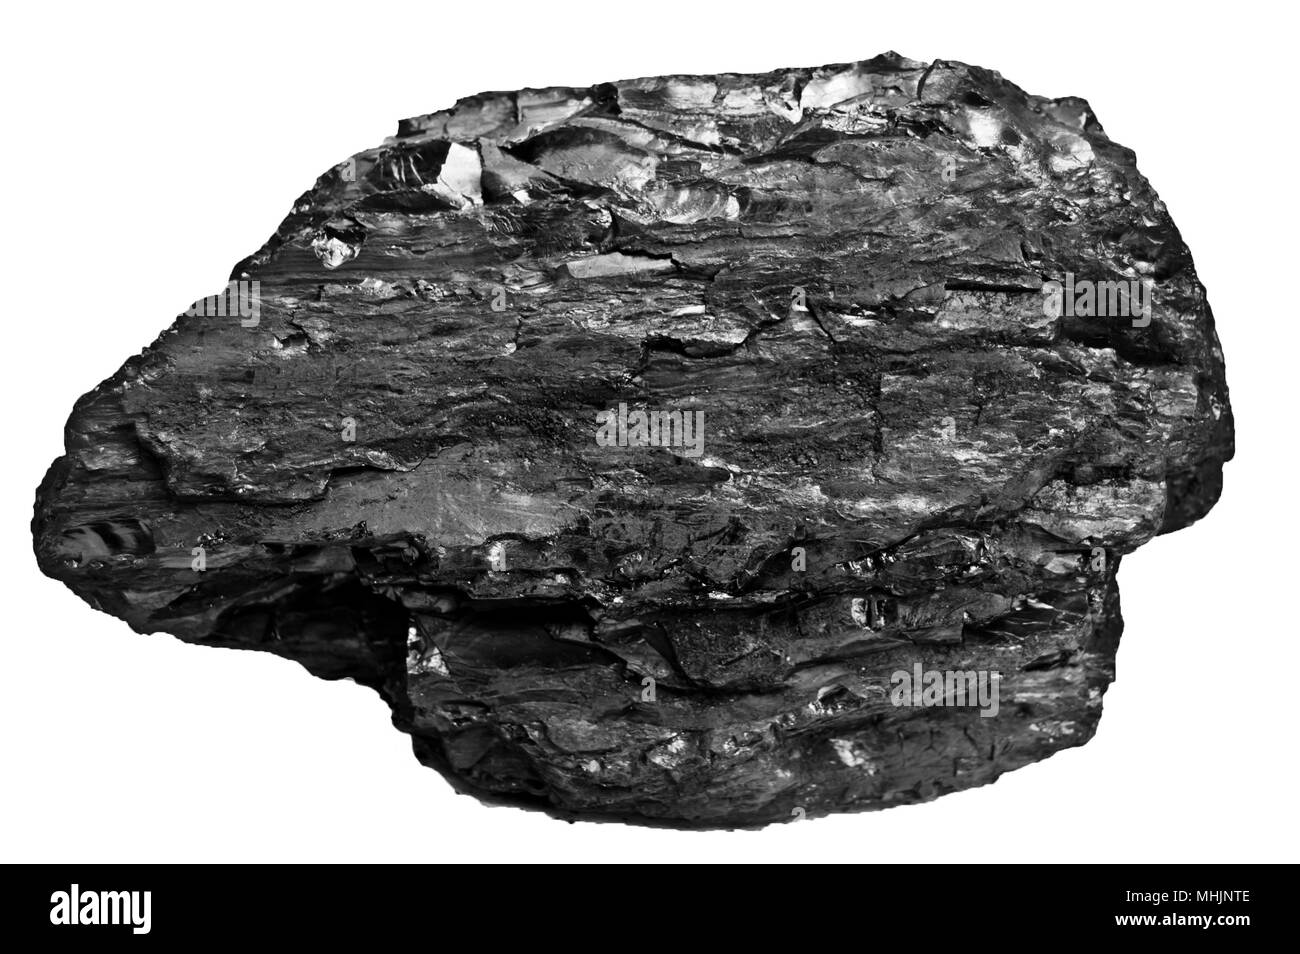 Coal close up on white background. Place for text. Copy space.High quality coal mined in Kuznetzk basin. Coal-basin.Kuzbass, Western Siberia,Russia Stock Photo